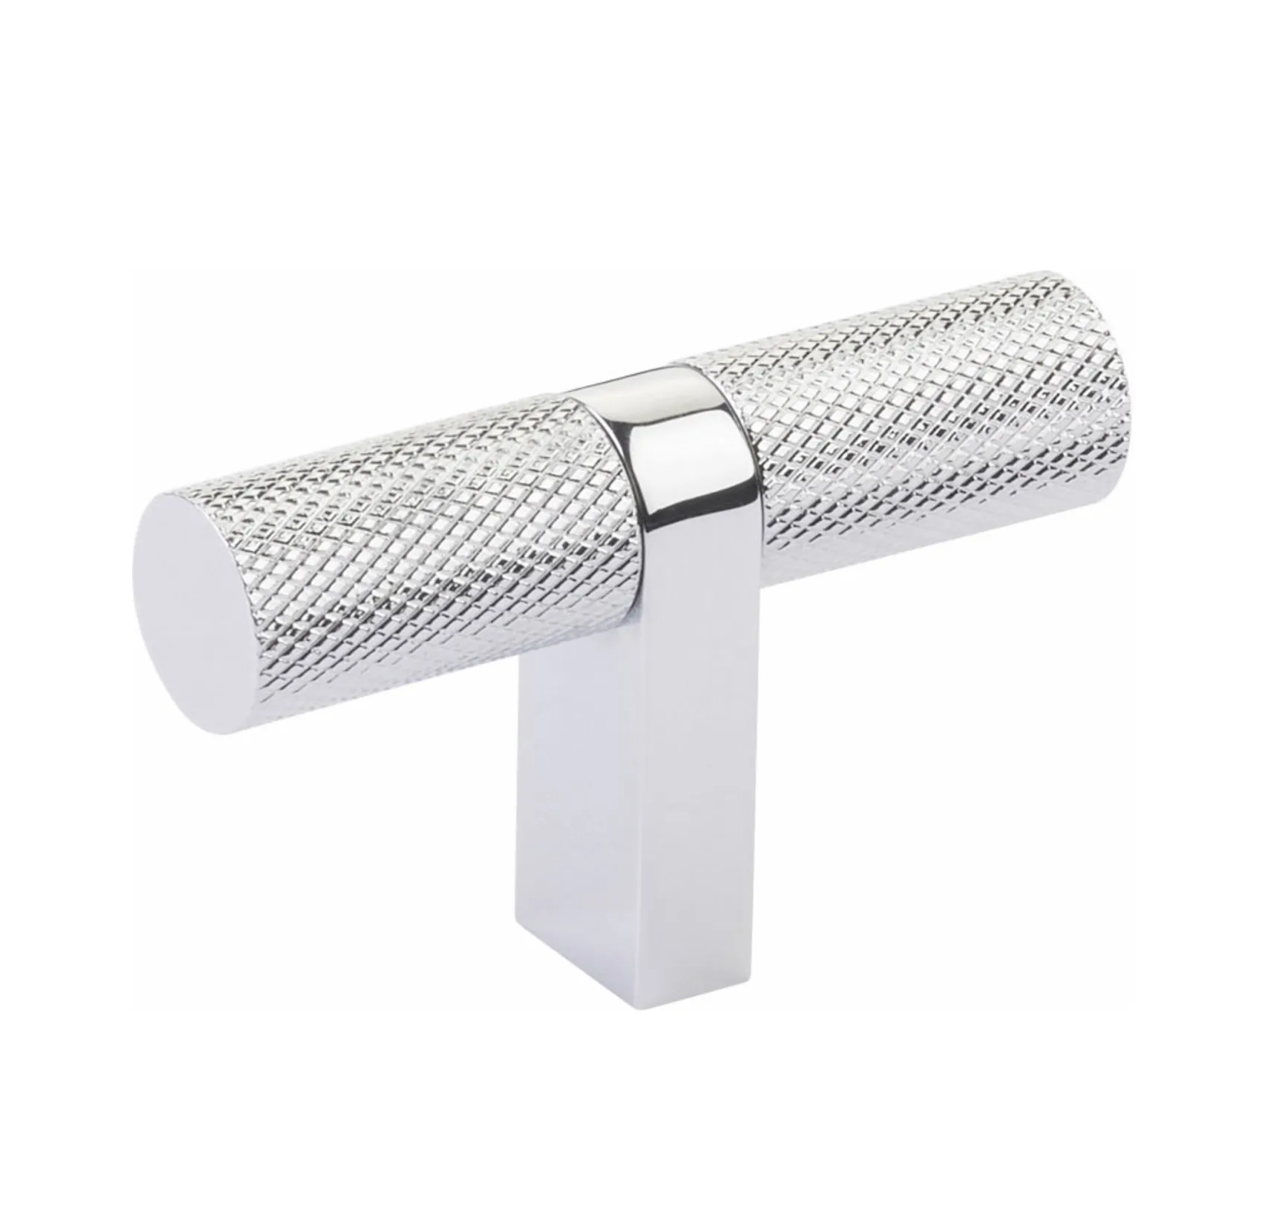 Knurled "Converse" Polished Chrome Cabinet Knobs and Drawer Pulls - Industry Hardware